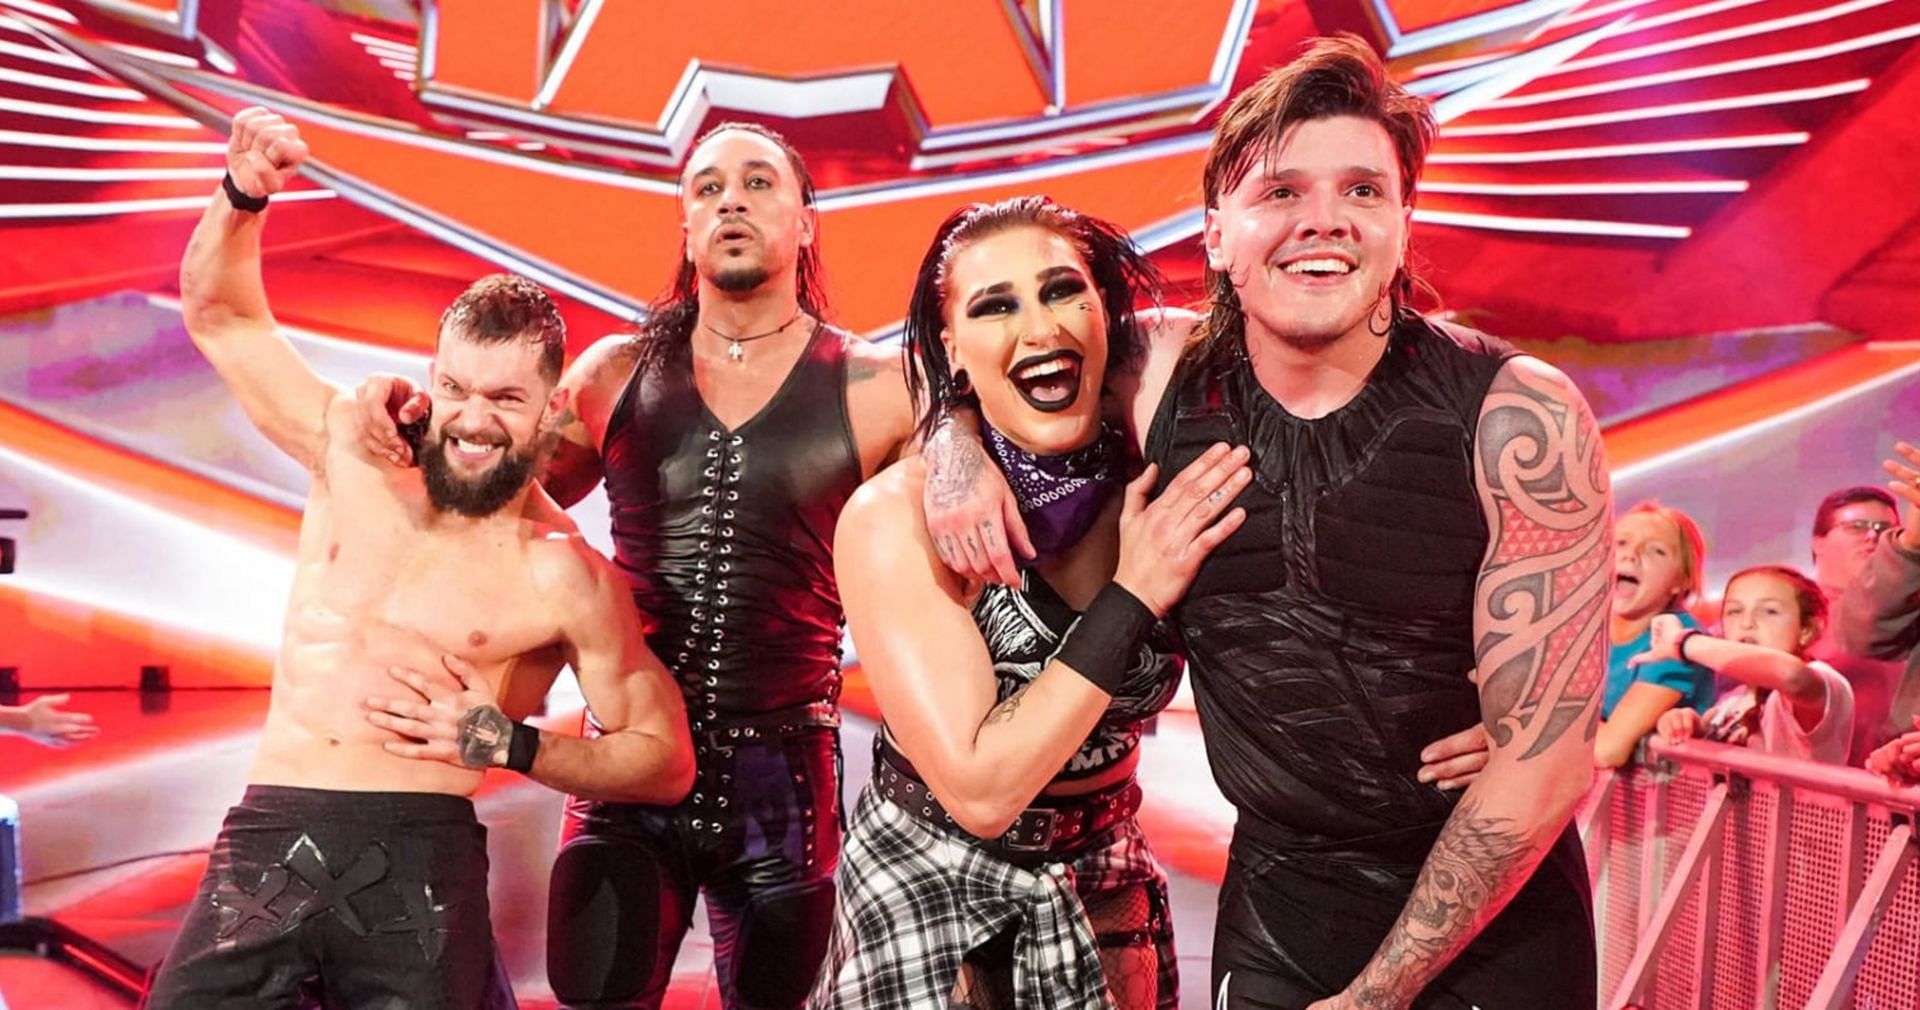 The Judgment Day will continue to rule RAW after the 2023 WWE Draft.